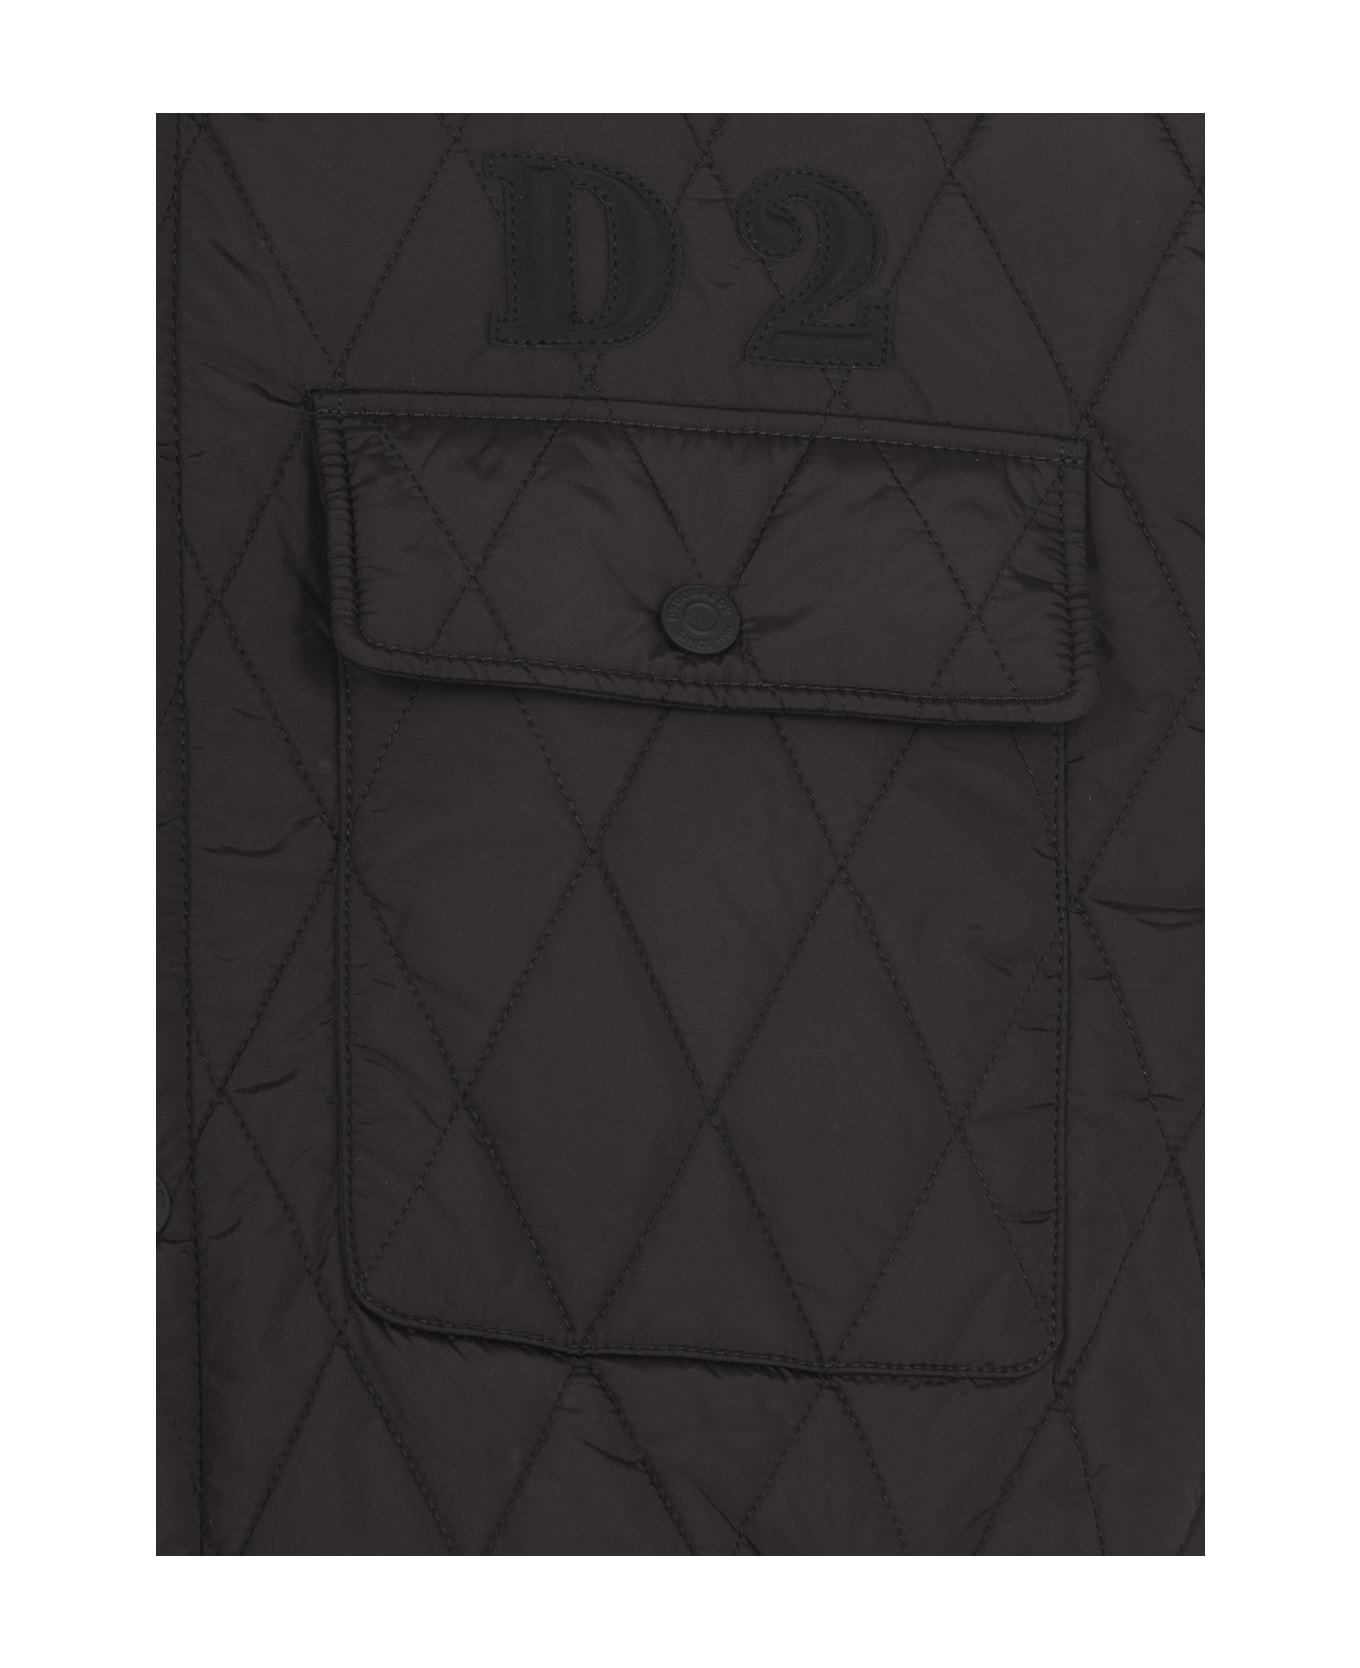 Dsquared2 Logoed Quilted Jacket - Black